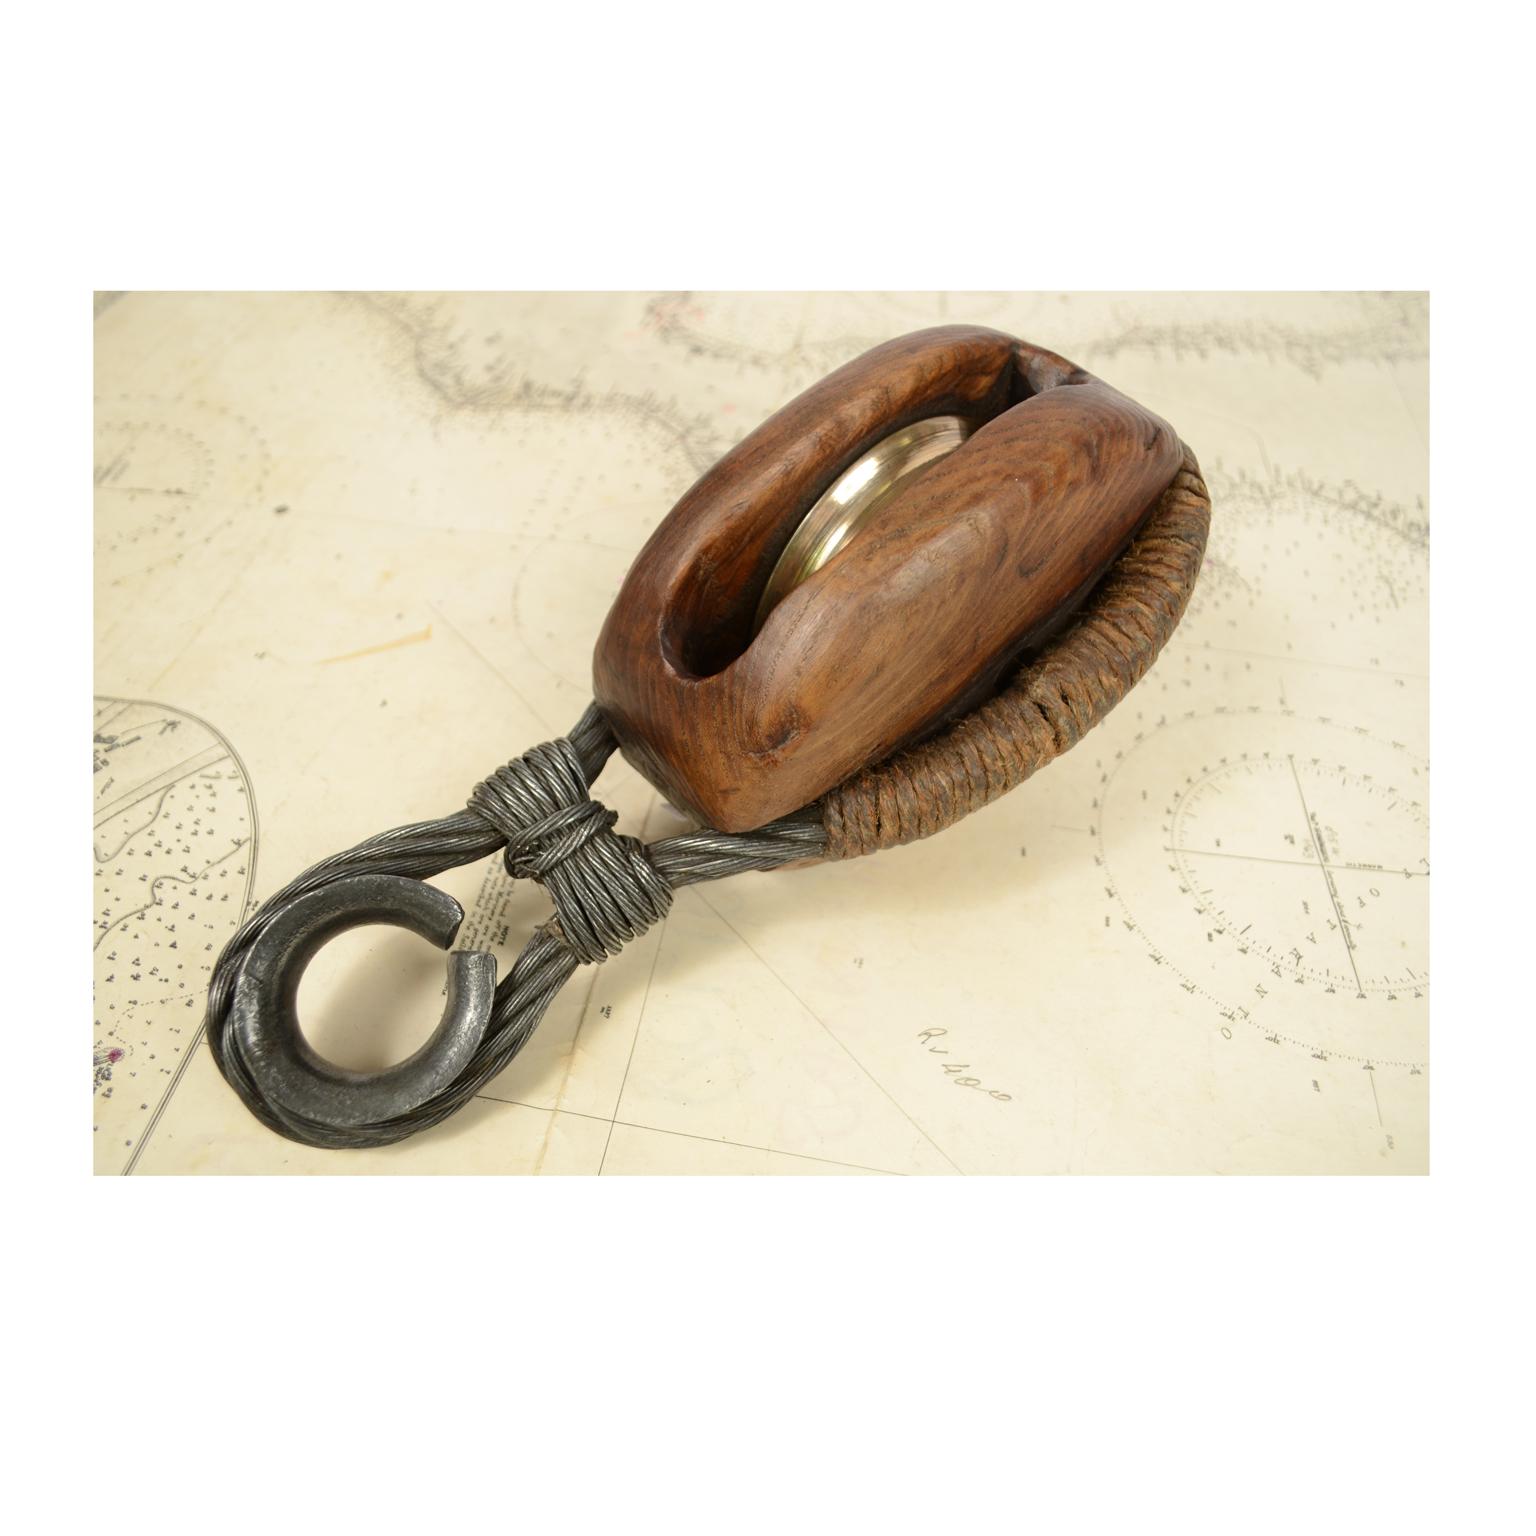 Simple wooden block complete with steel ring and rope with brass pulley, consisting of two sides inside which the pulley is placed. English manufacture of the second half of the 19th century. Measures 12 x 12 cm, length 29 cm. In excellent